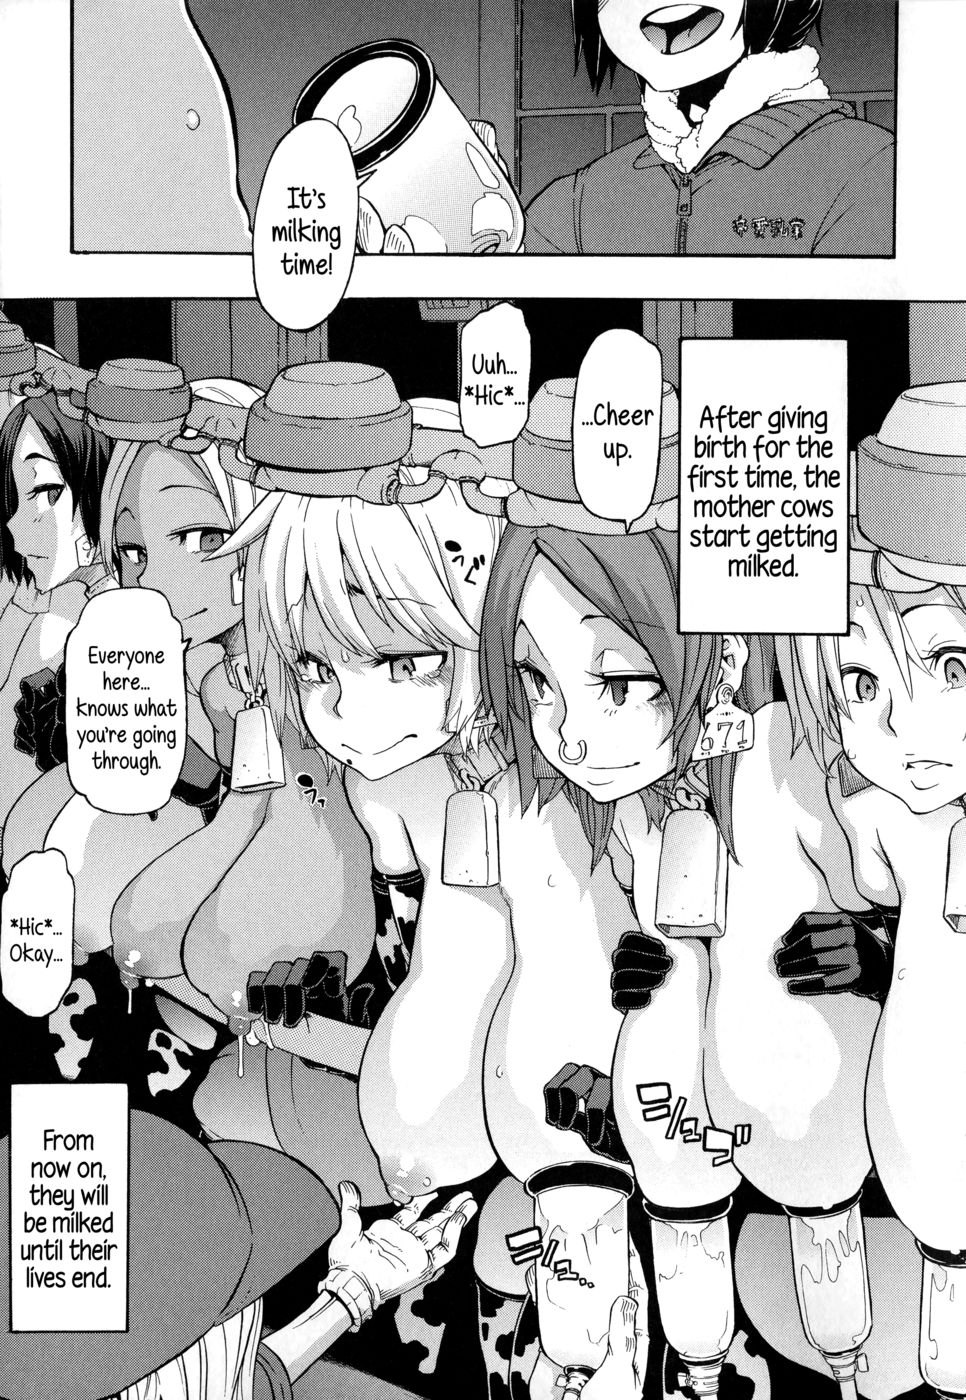 Anime Porn Milking Cow - A dairy cow's life-Read-Hentai Manga Hentai Comic - Page: 31 - Online porn  video at mobile